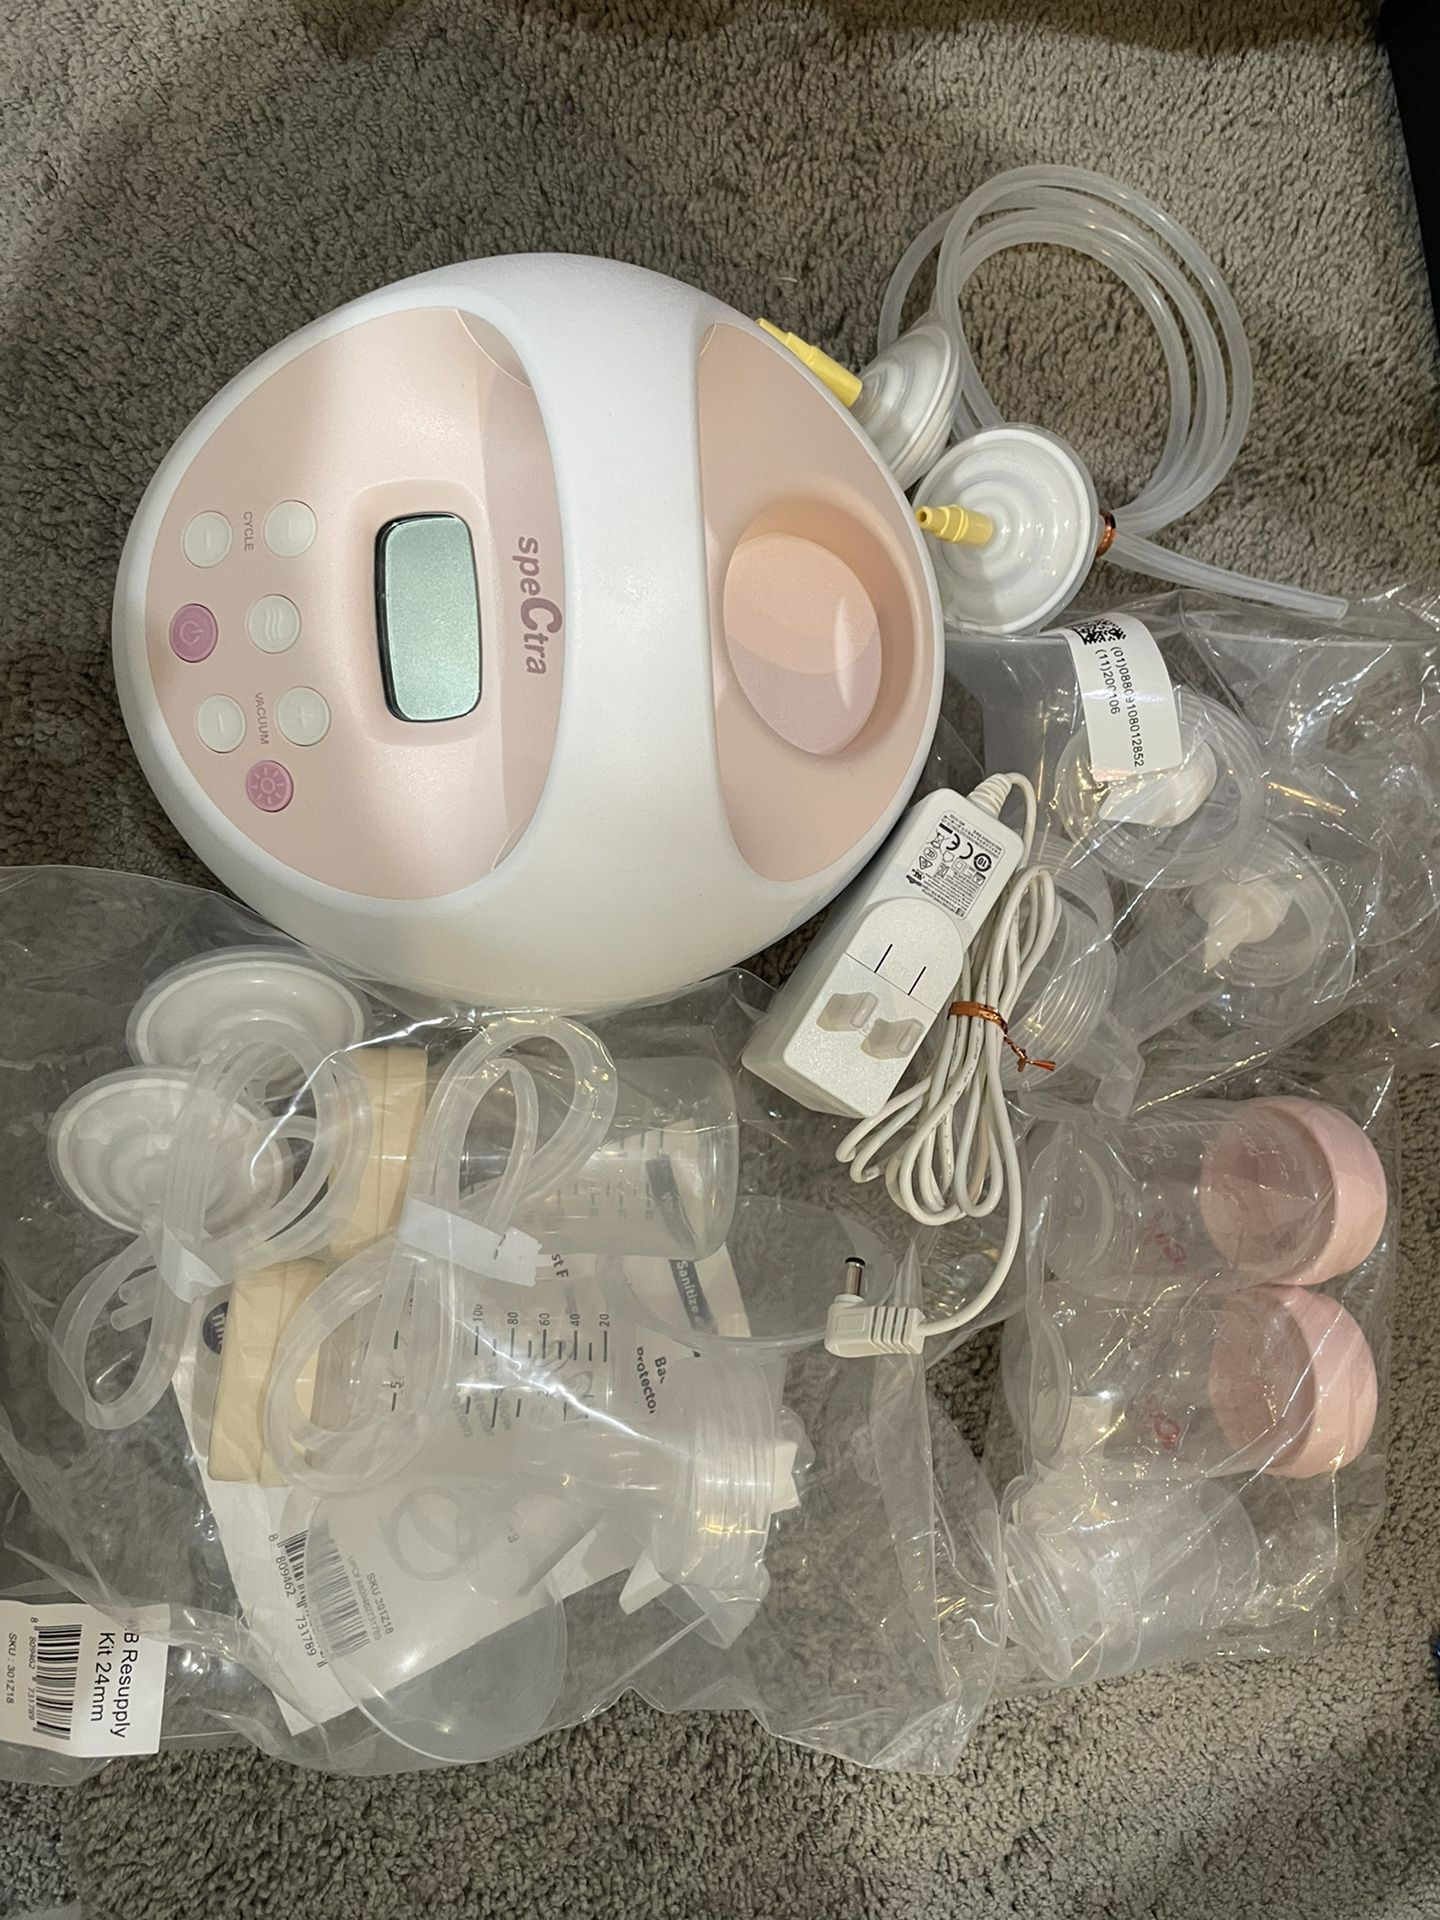 Spectra 2 Double Electric Hospital Grade Breast Pump